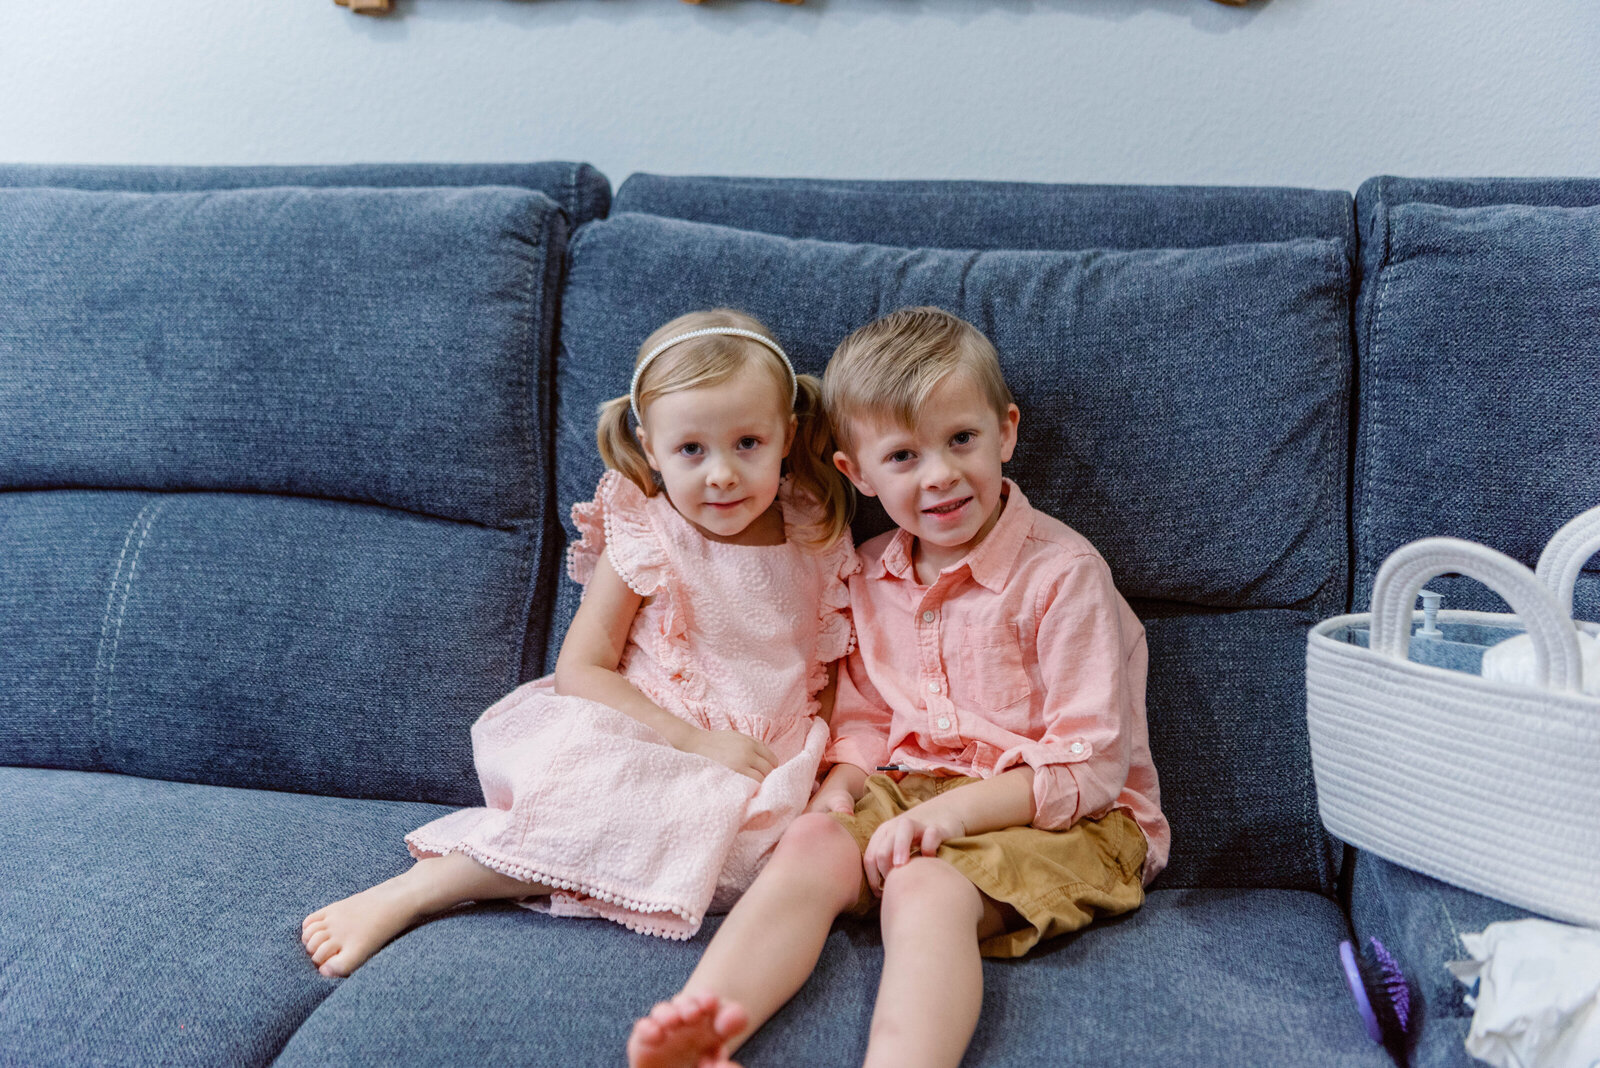 Boy and girl take a photo on the couch in their Murrieta home waiting for newborn sister